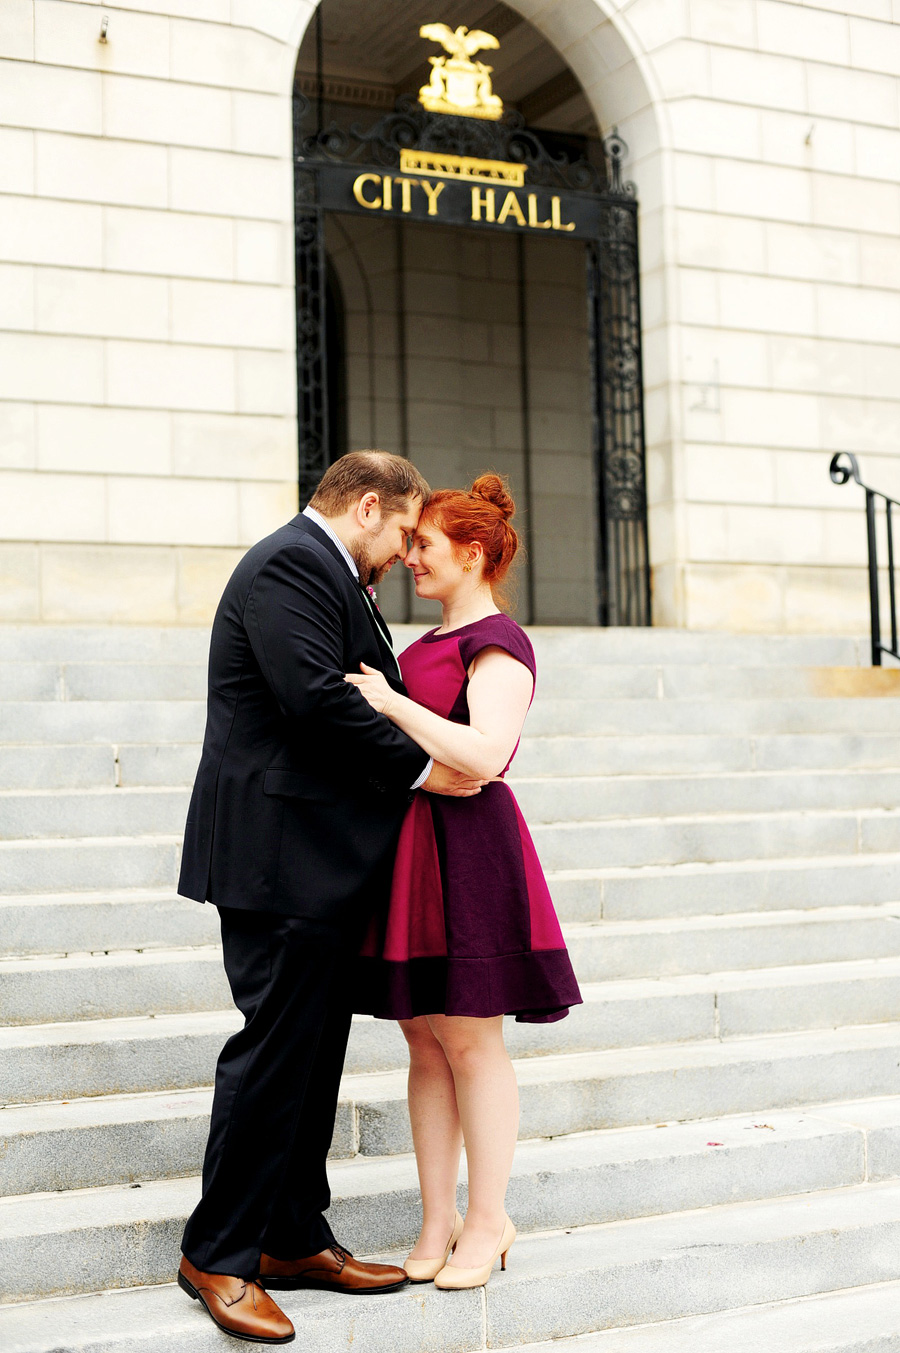 They were married at City Hall, so this photo was a must. :)